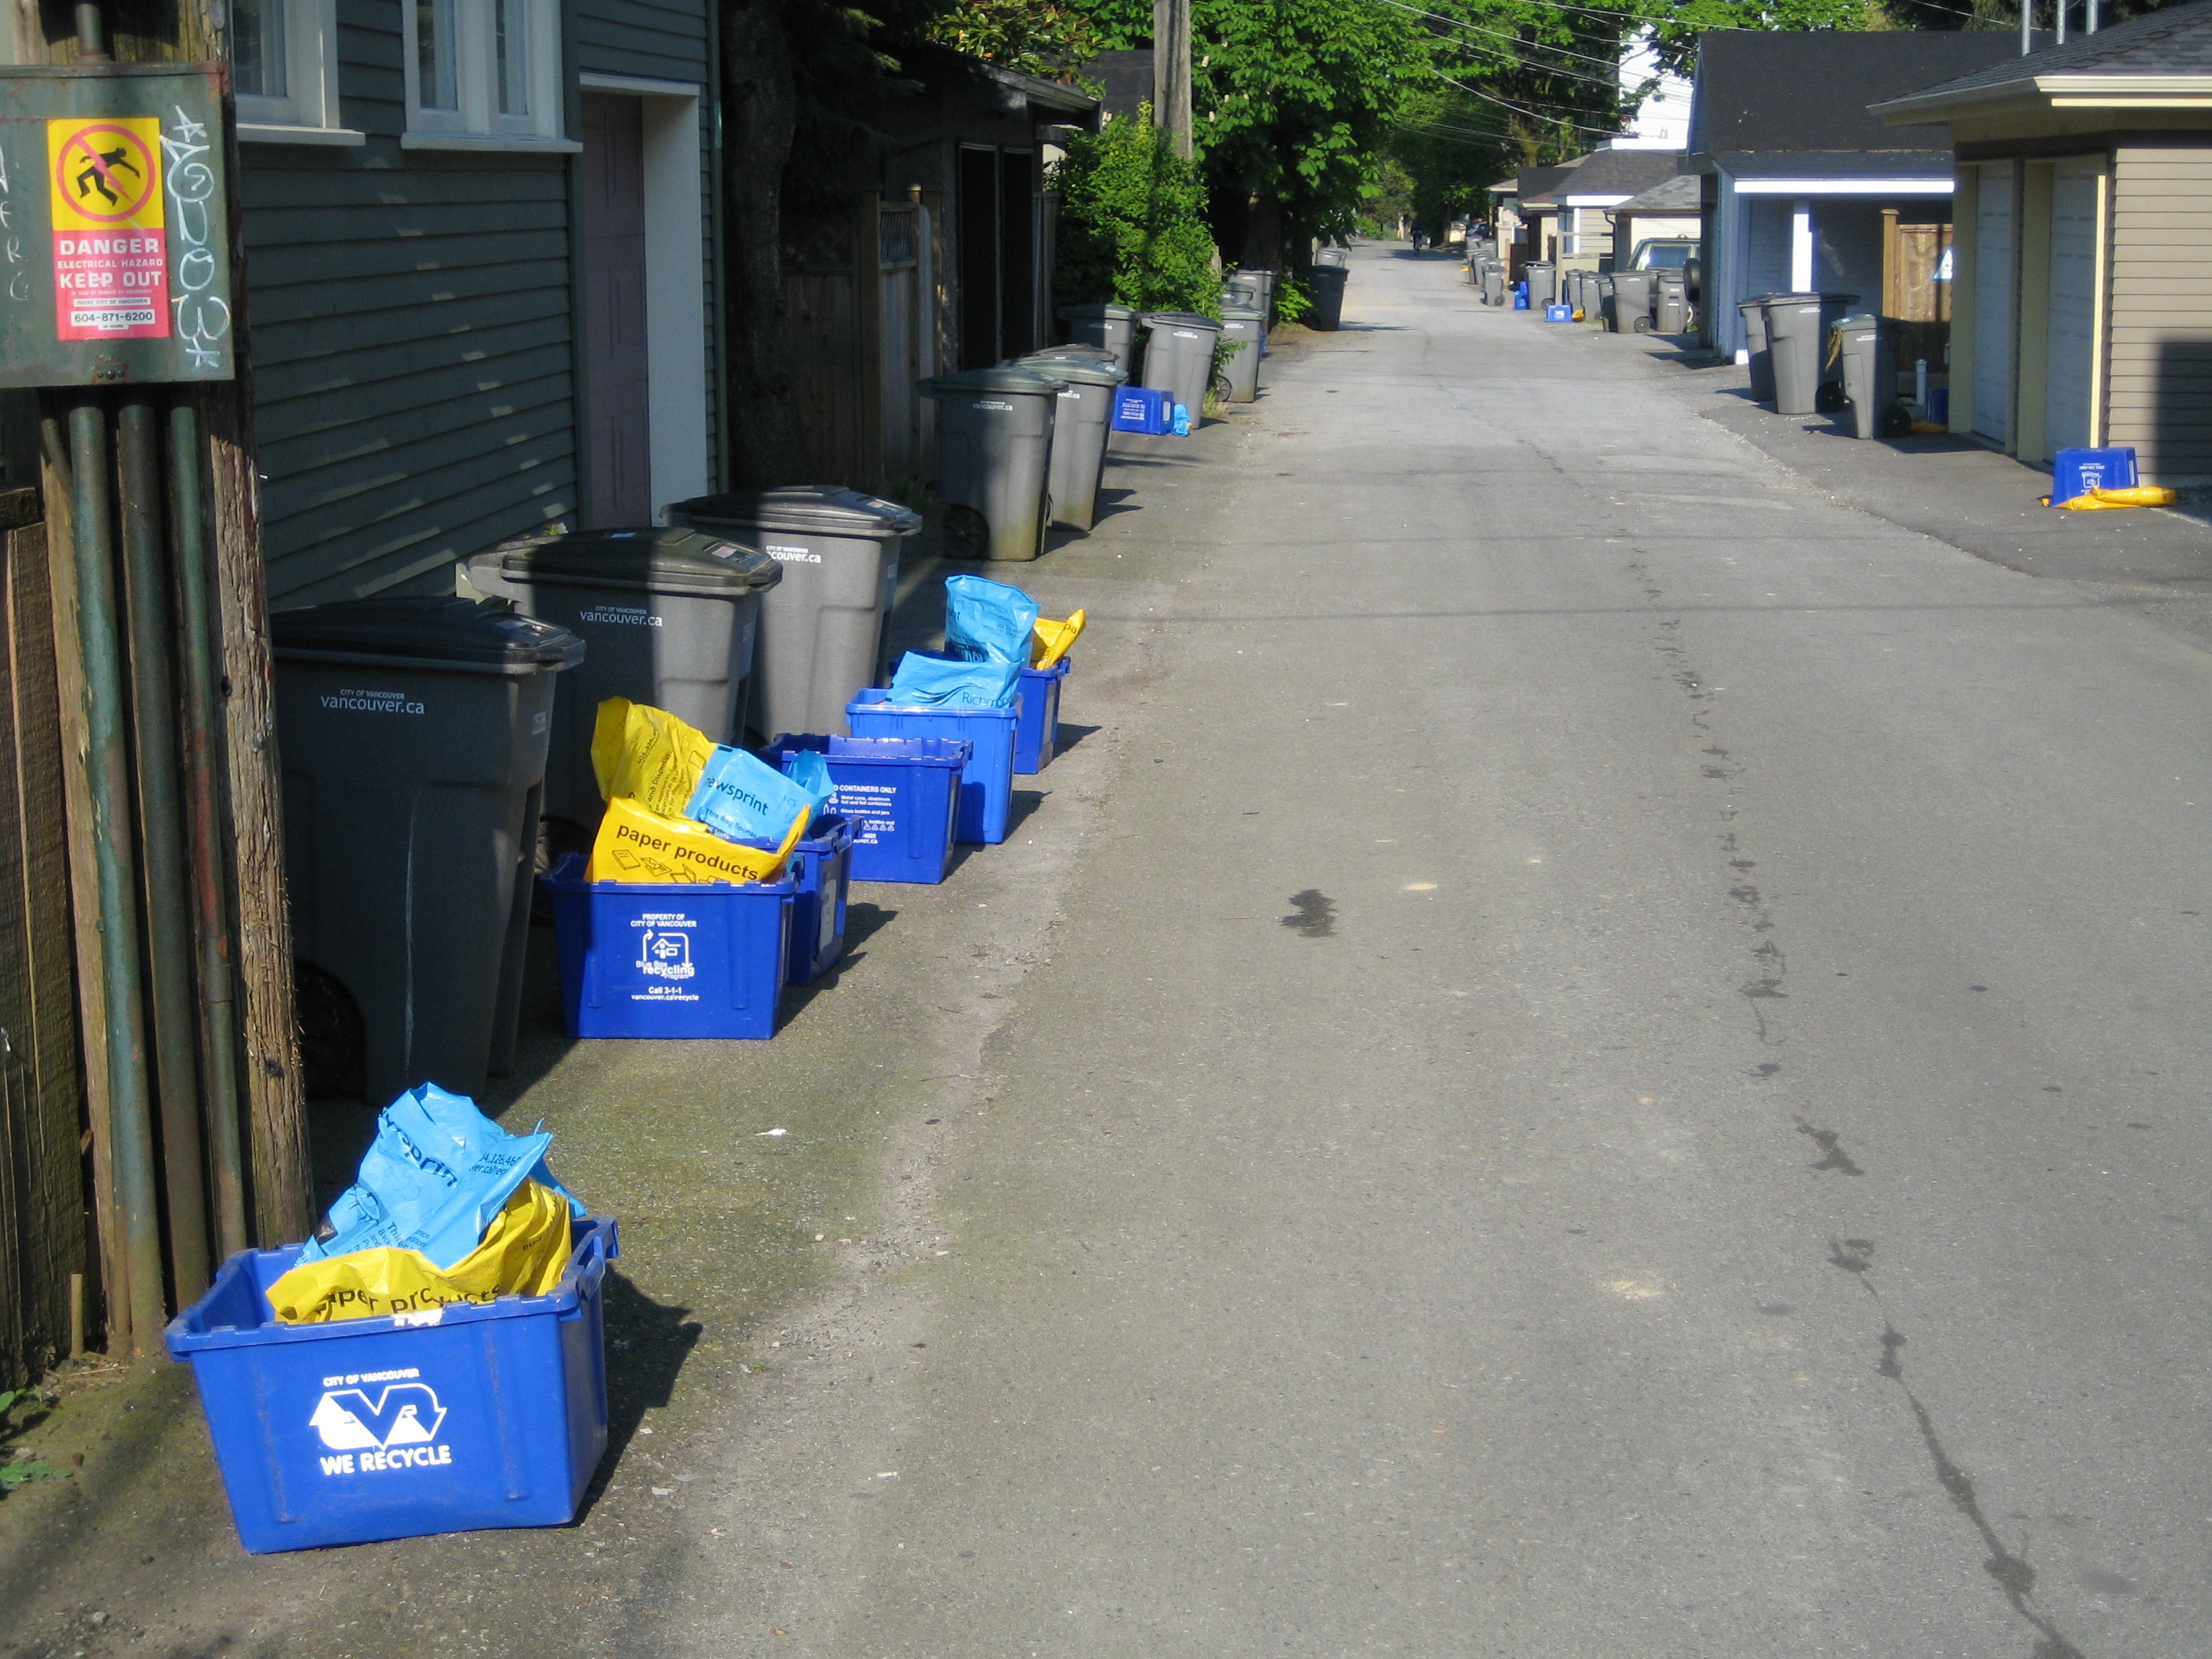 Blue bins are a signifier in a climate change landscape. What do they mean to you? Photo: S. Sheppard